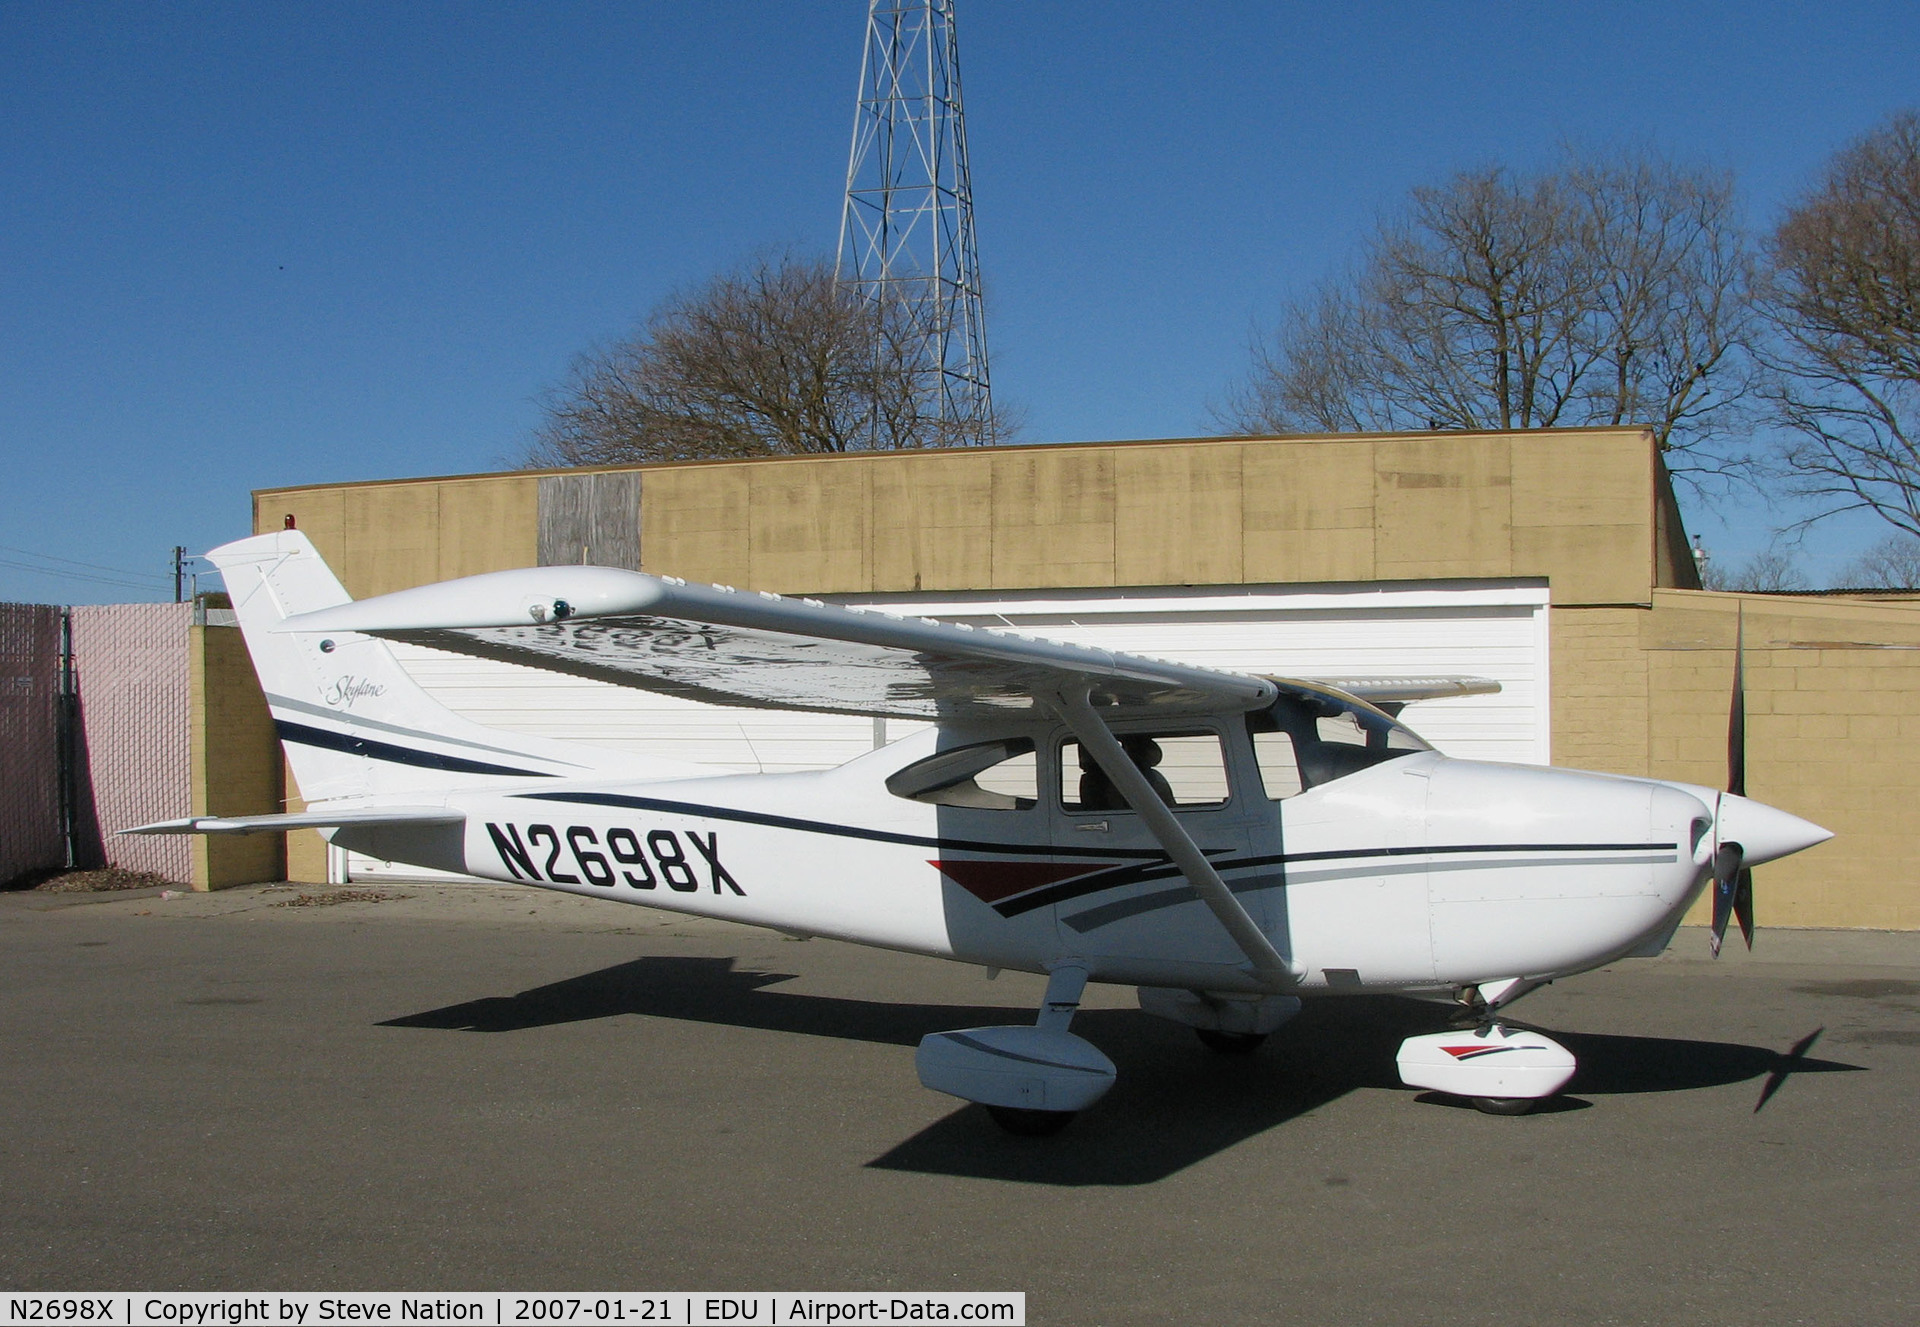 N2698X, 1998 Cessna 182S Skylane C/N 18280318, 1998 Cessna 182S Skylane @ University Airport, Davis, CA (now registered to private owner in Hondo, TX and current as of August 2017)